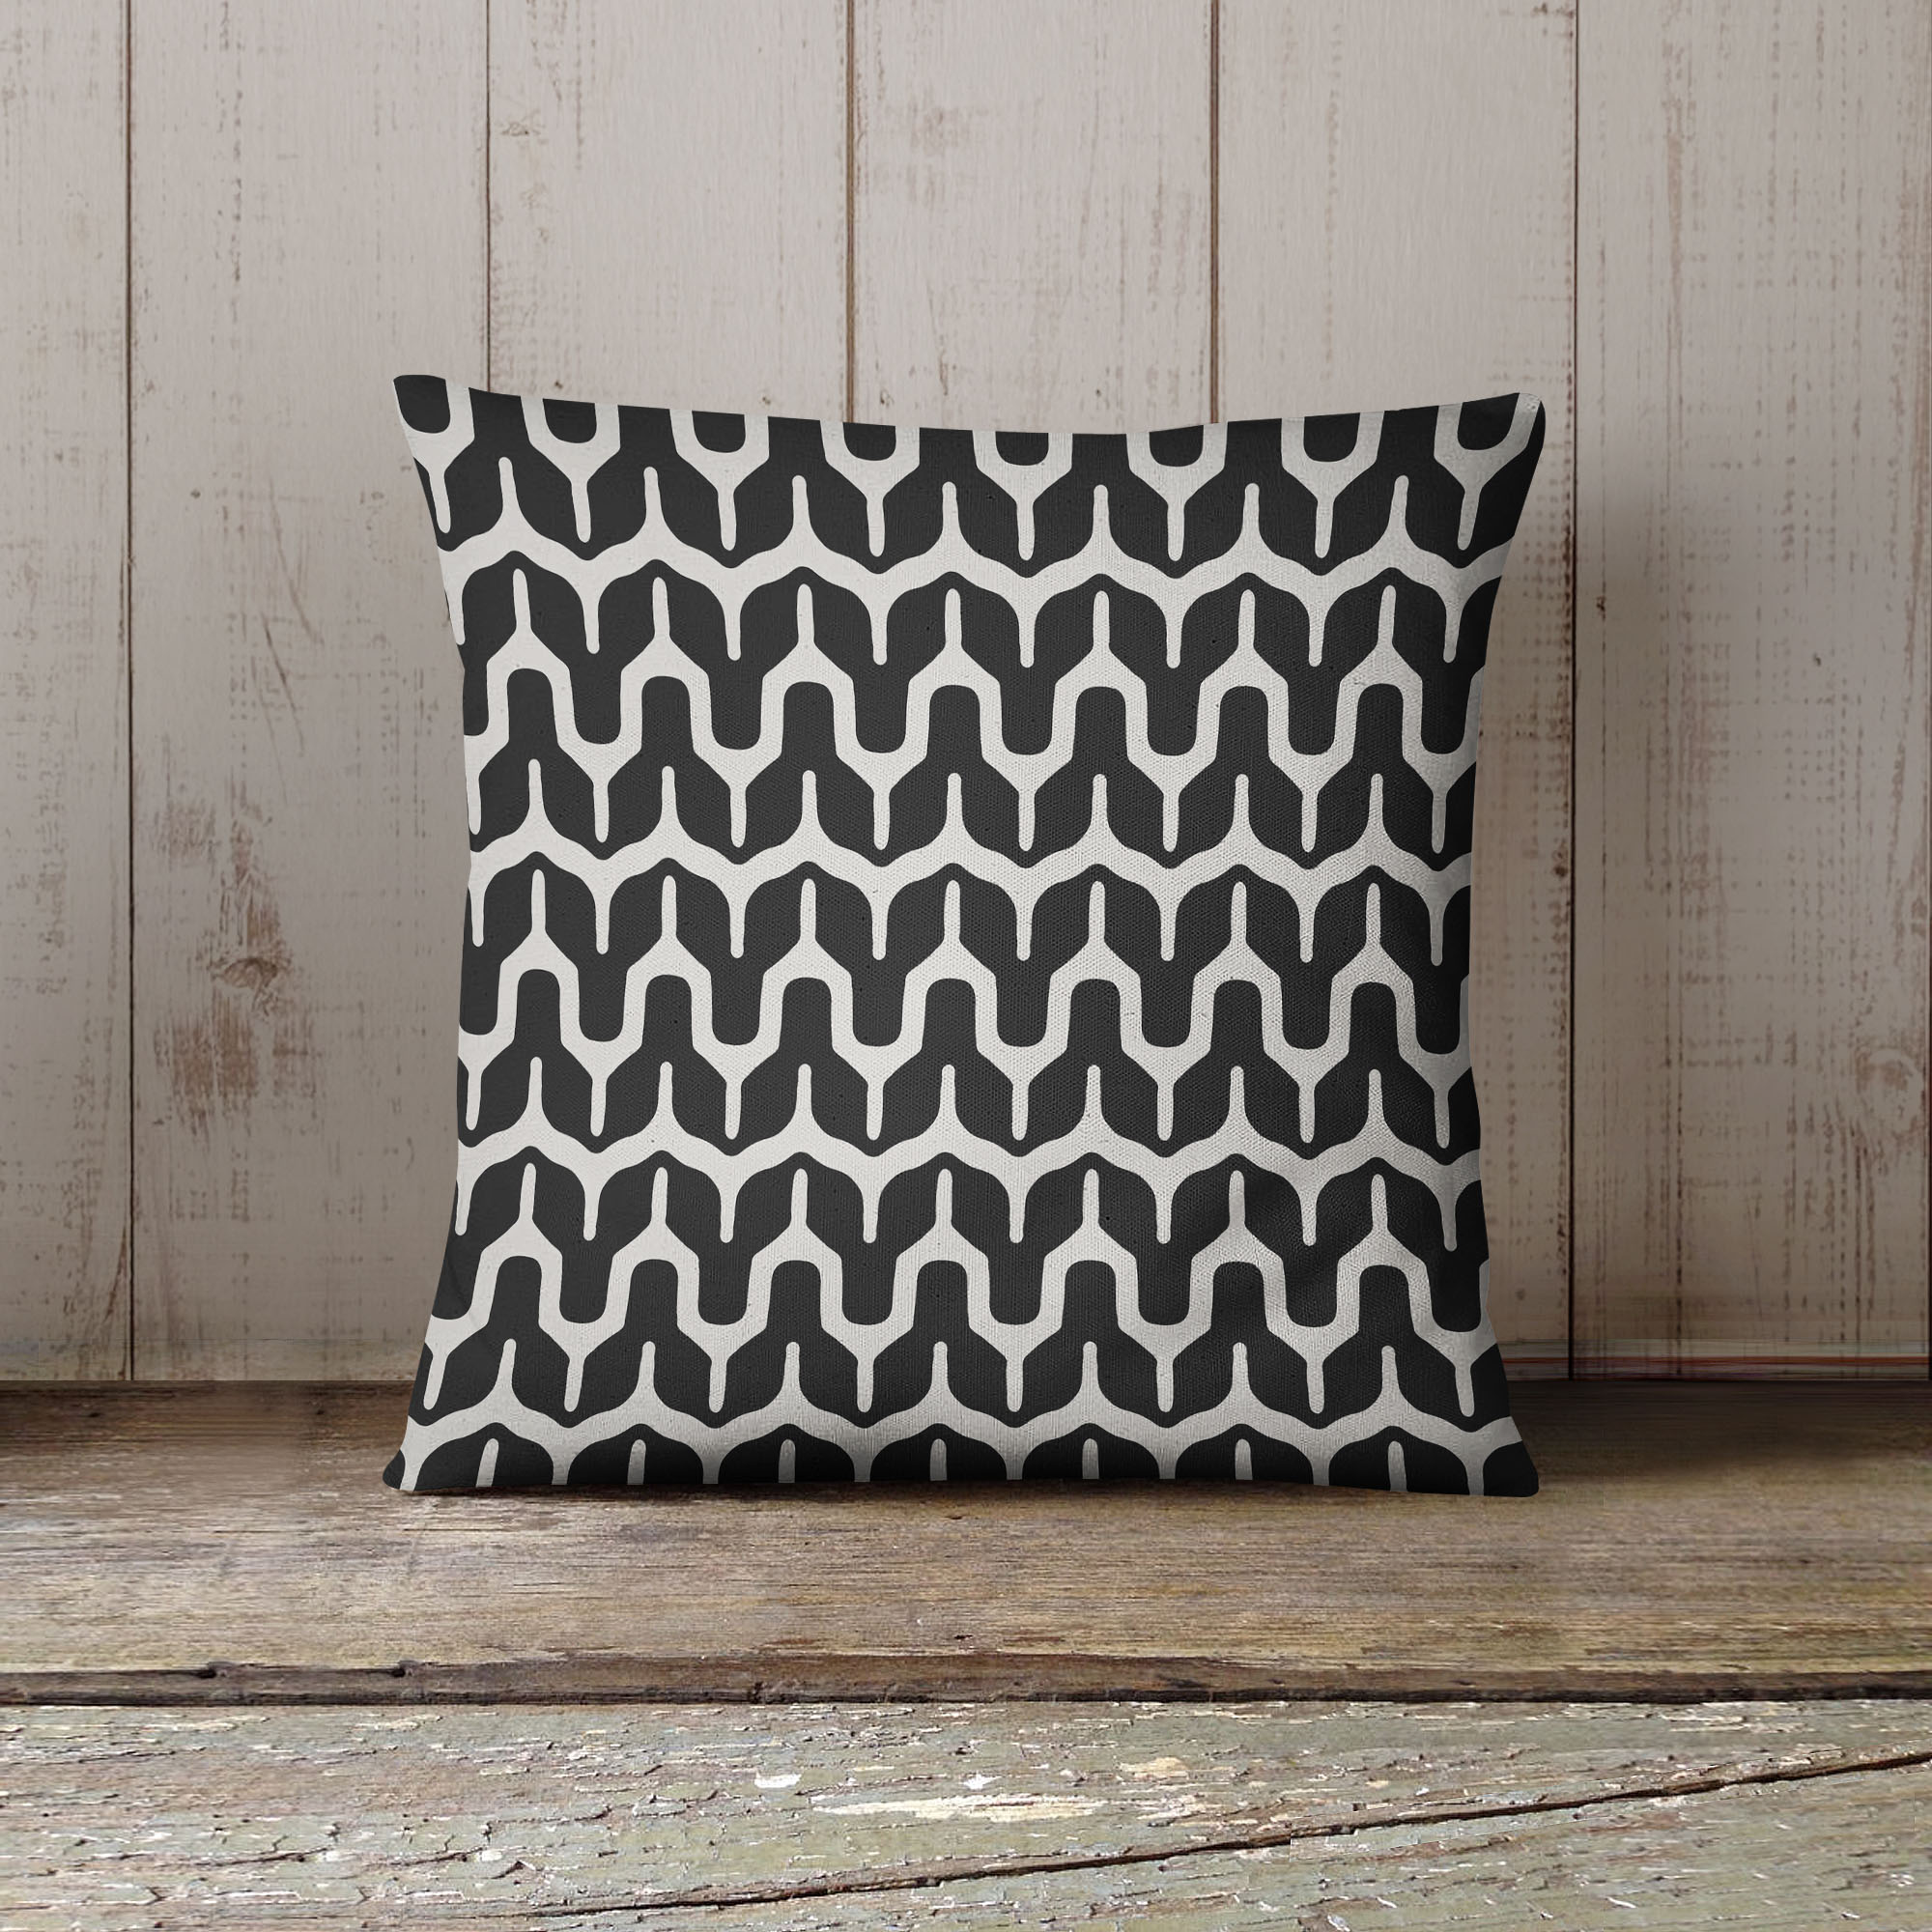 Maria Black and Beige Outdoor Pillow by Kavka Designs - image 2 of 5